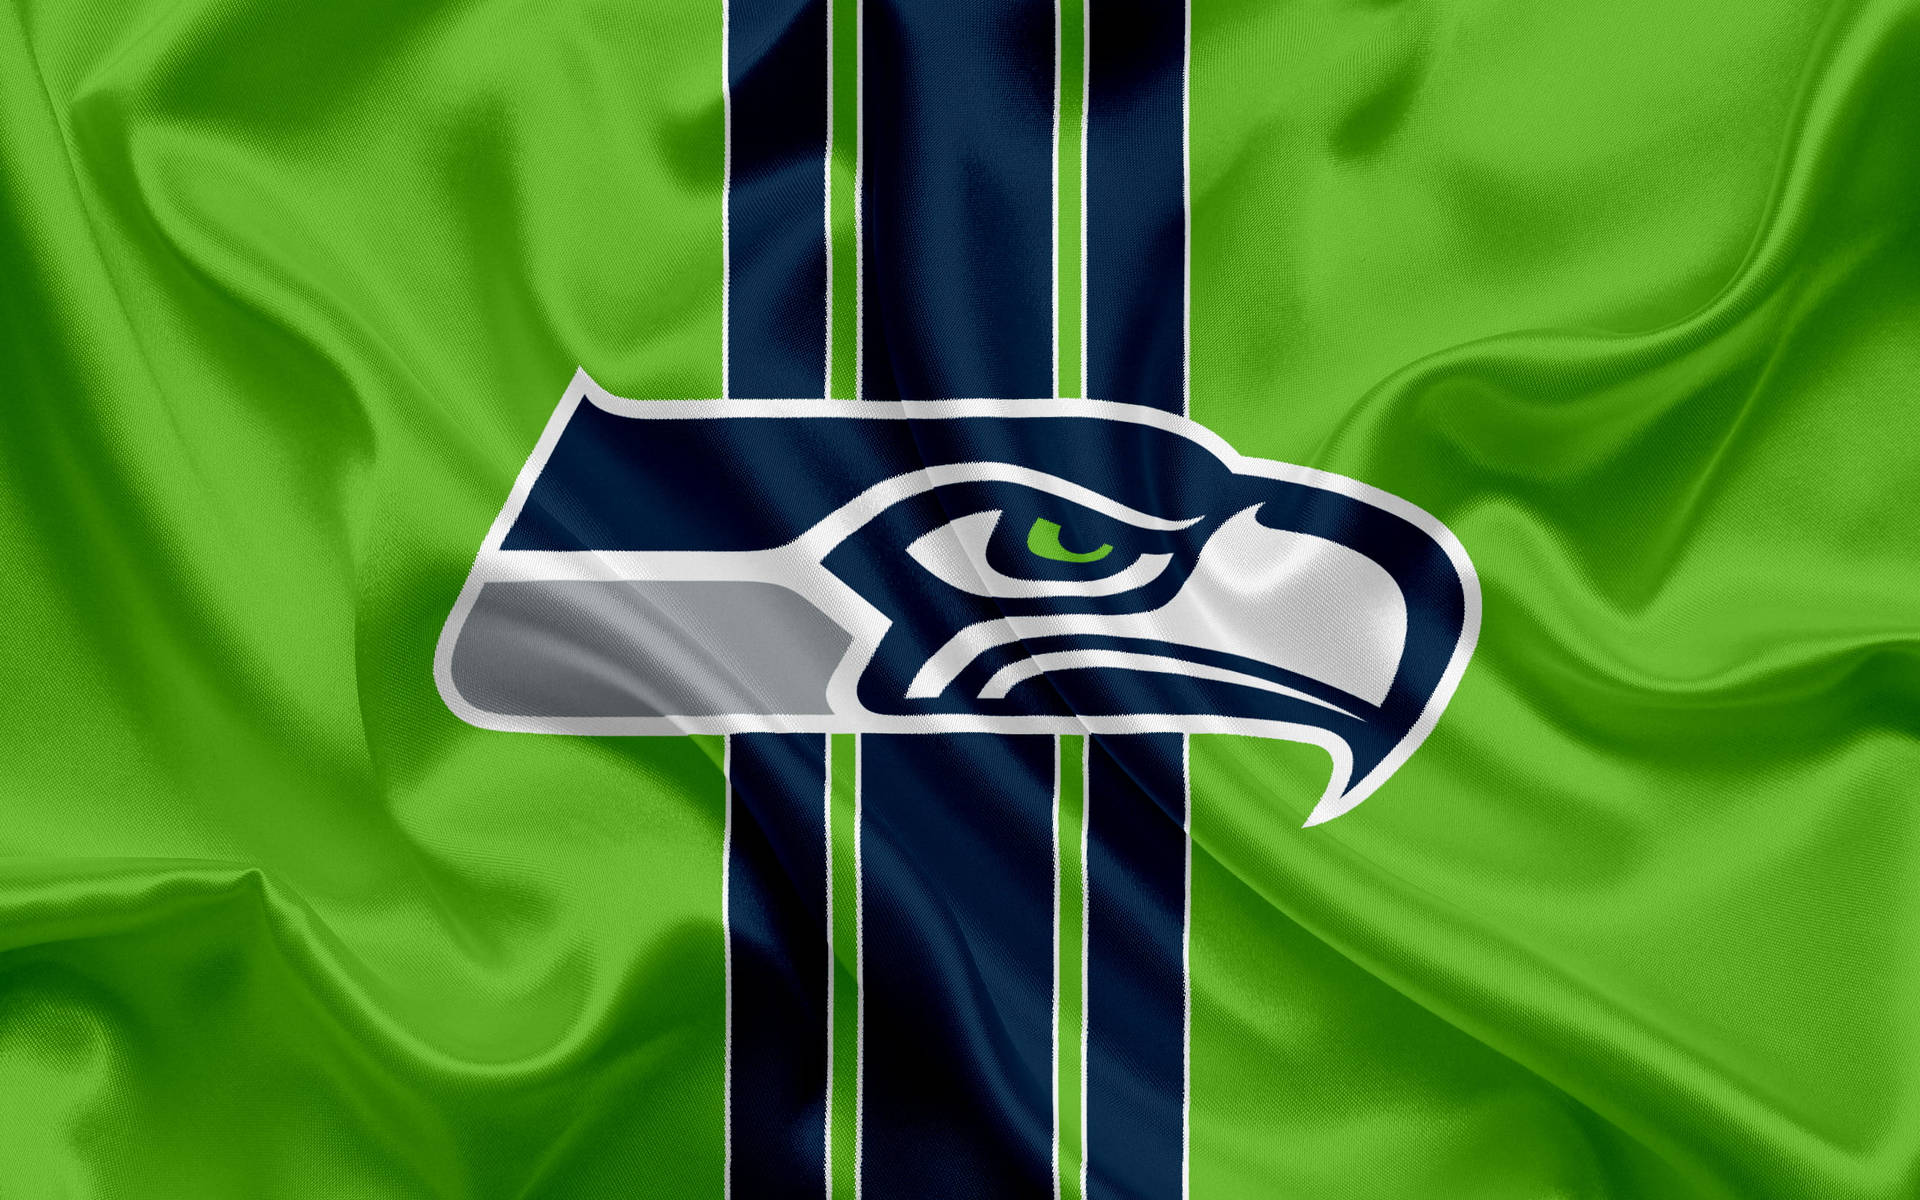 Seattle Seahawks Green Textile Background